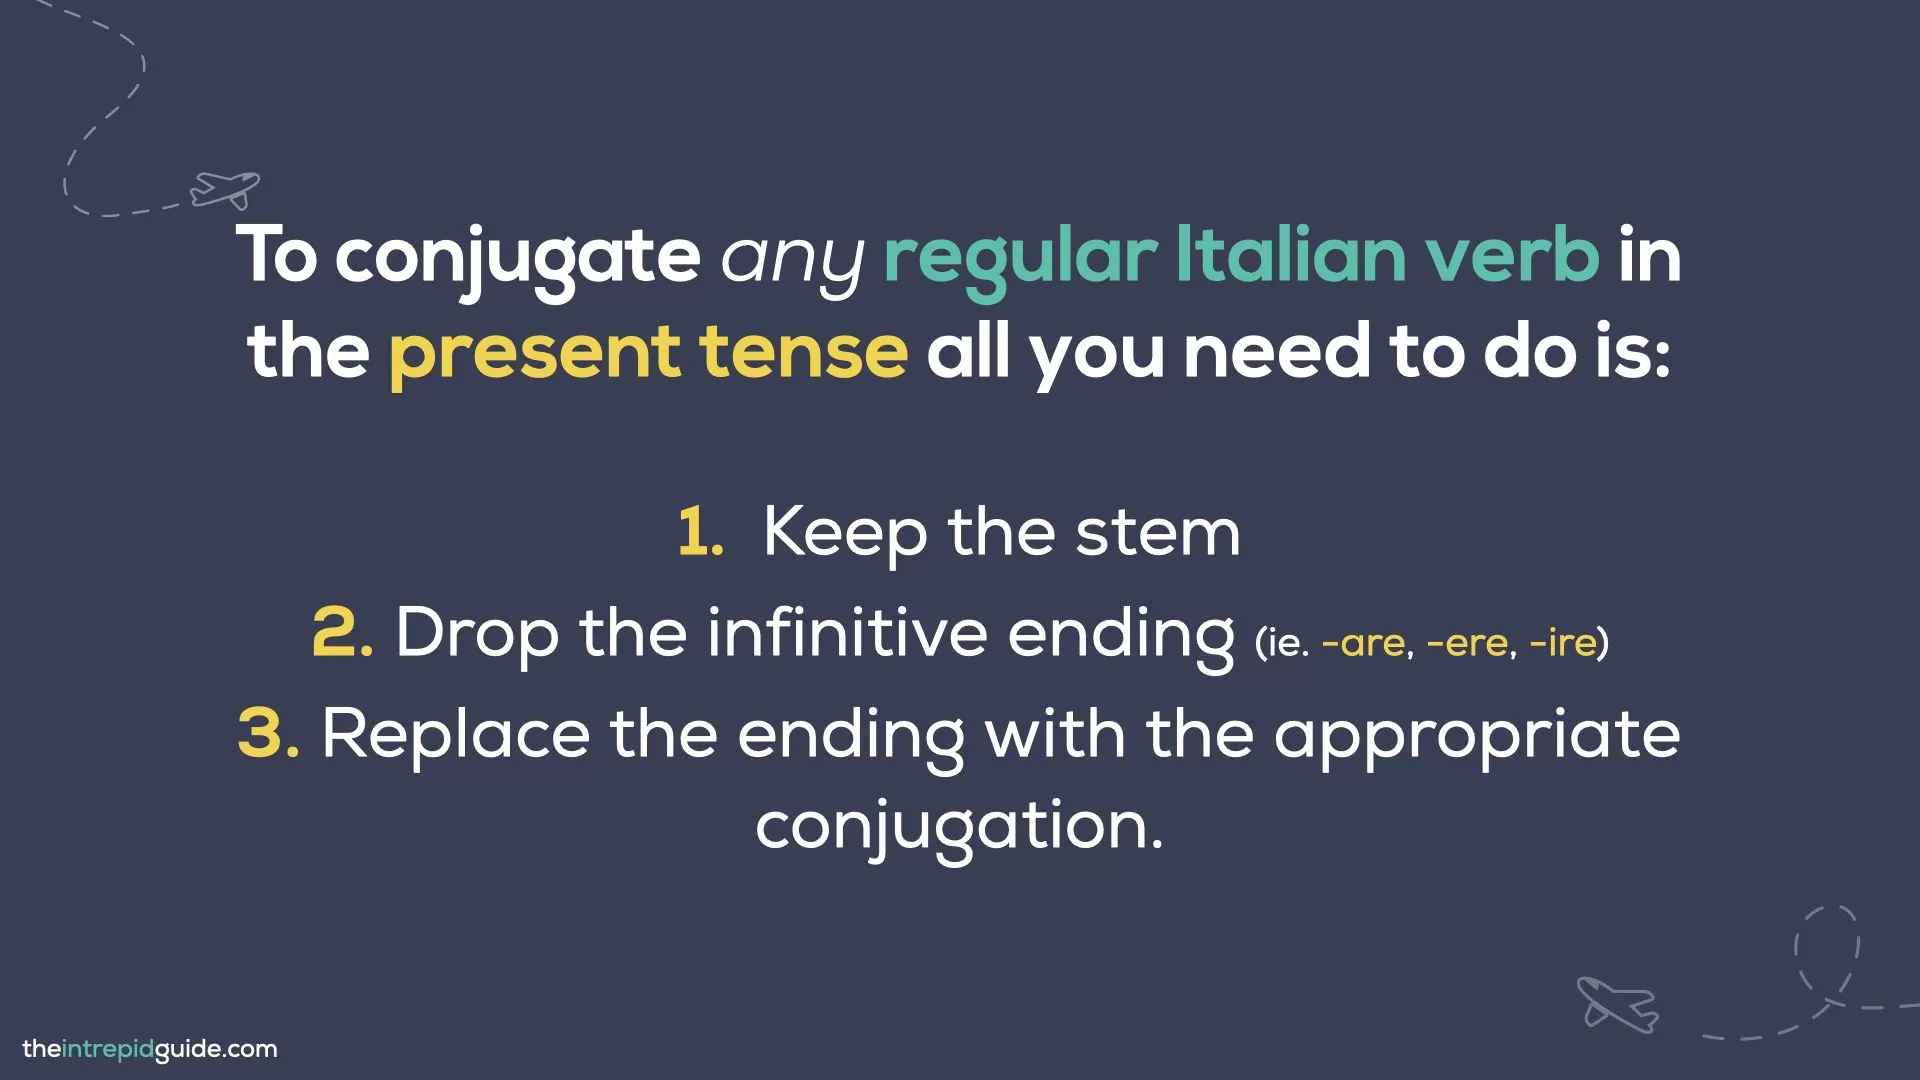 How to Conjugate Italian Verbs in 3 simple steps